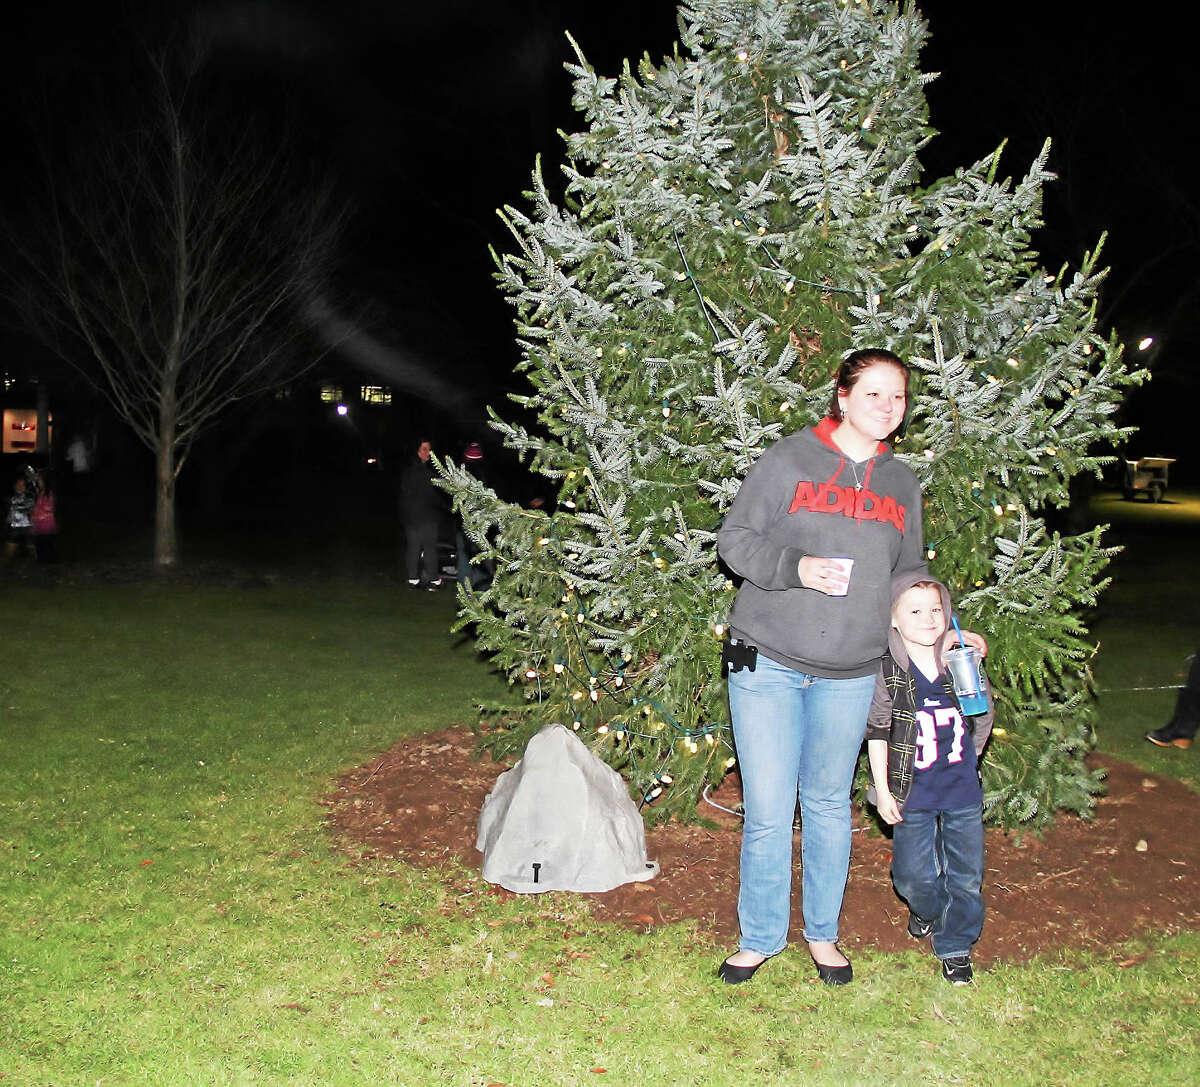 Ashley Chausse of Torrington and her son, Joseph Bessette, 6, at Coe Memorial Park in Torrington for the annual tree lighting event Friday evening.